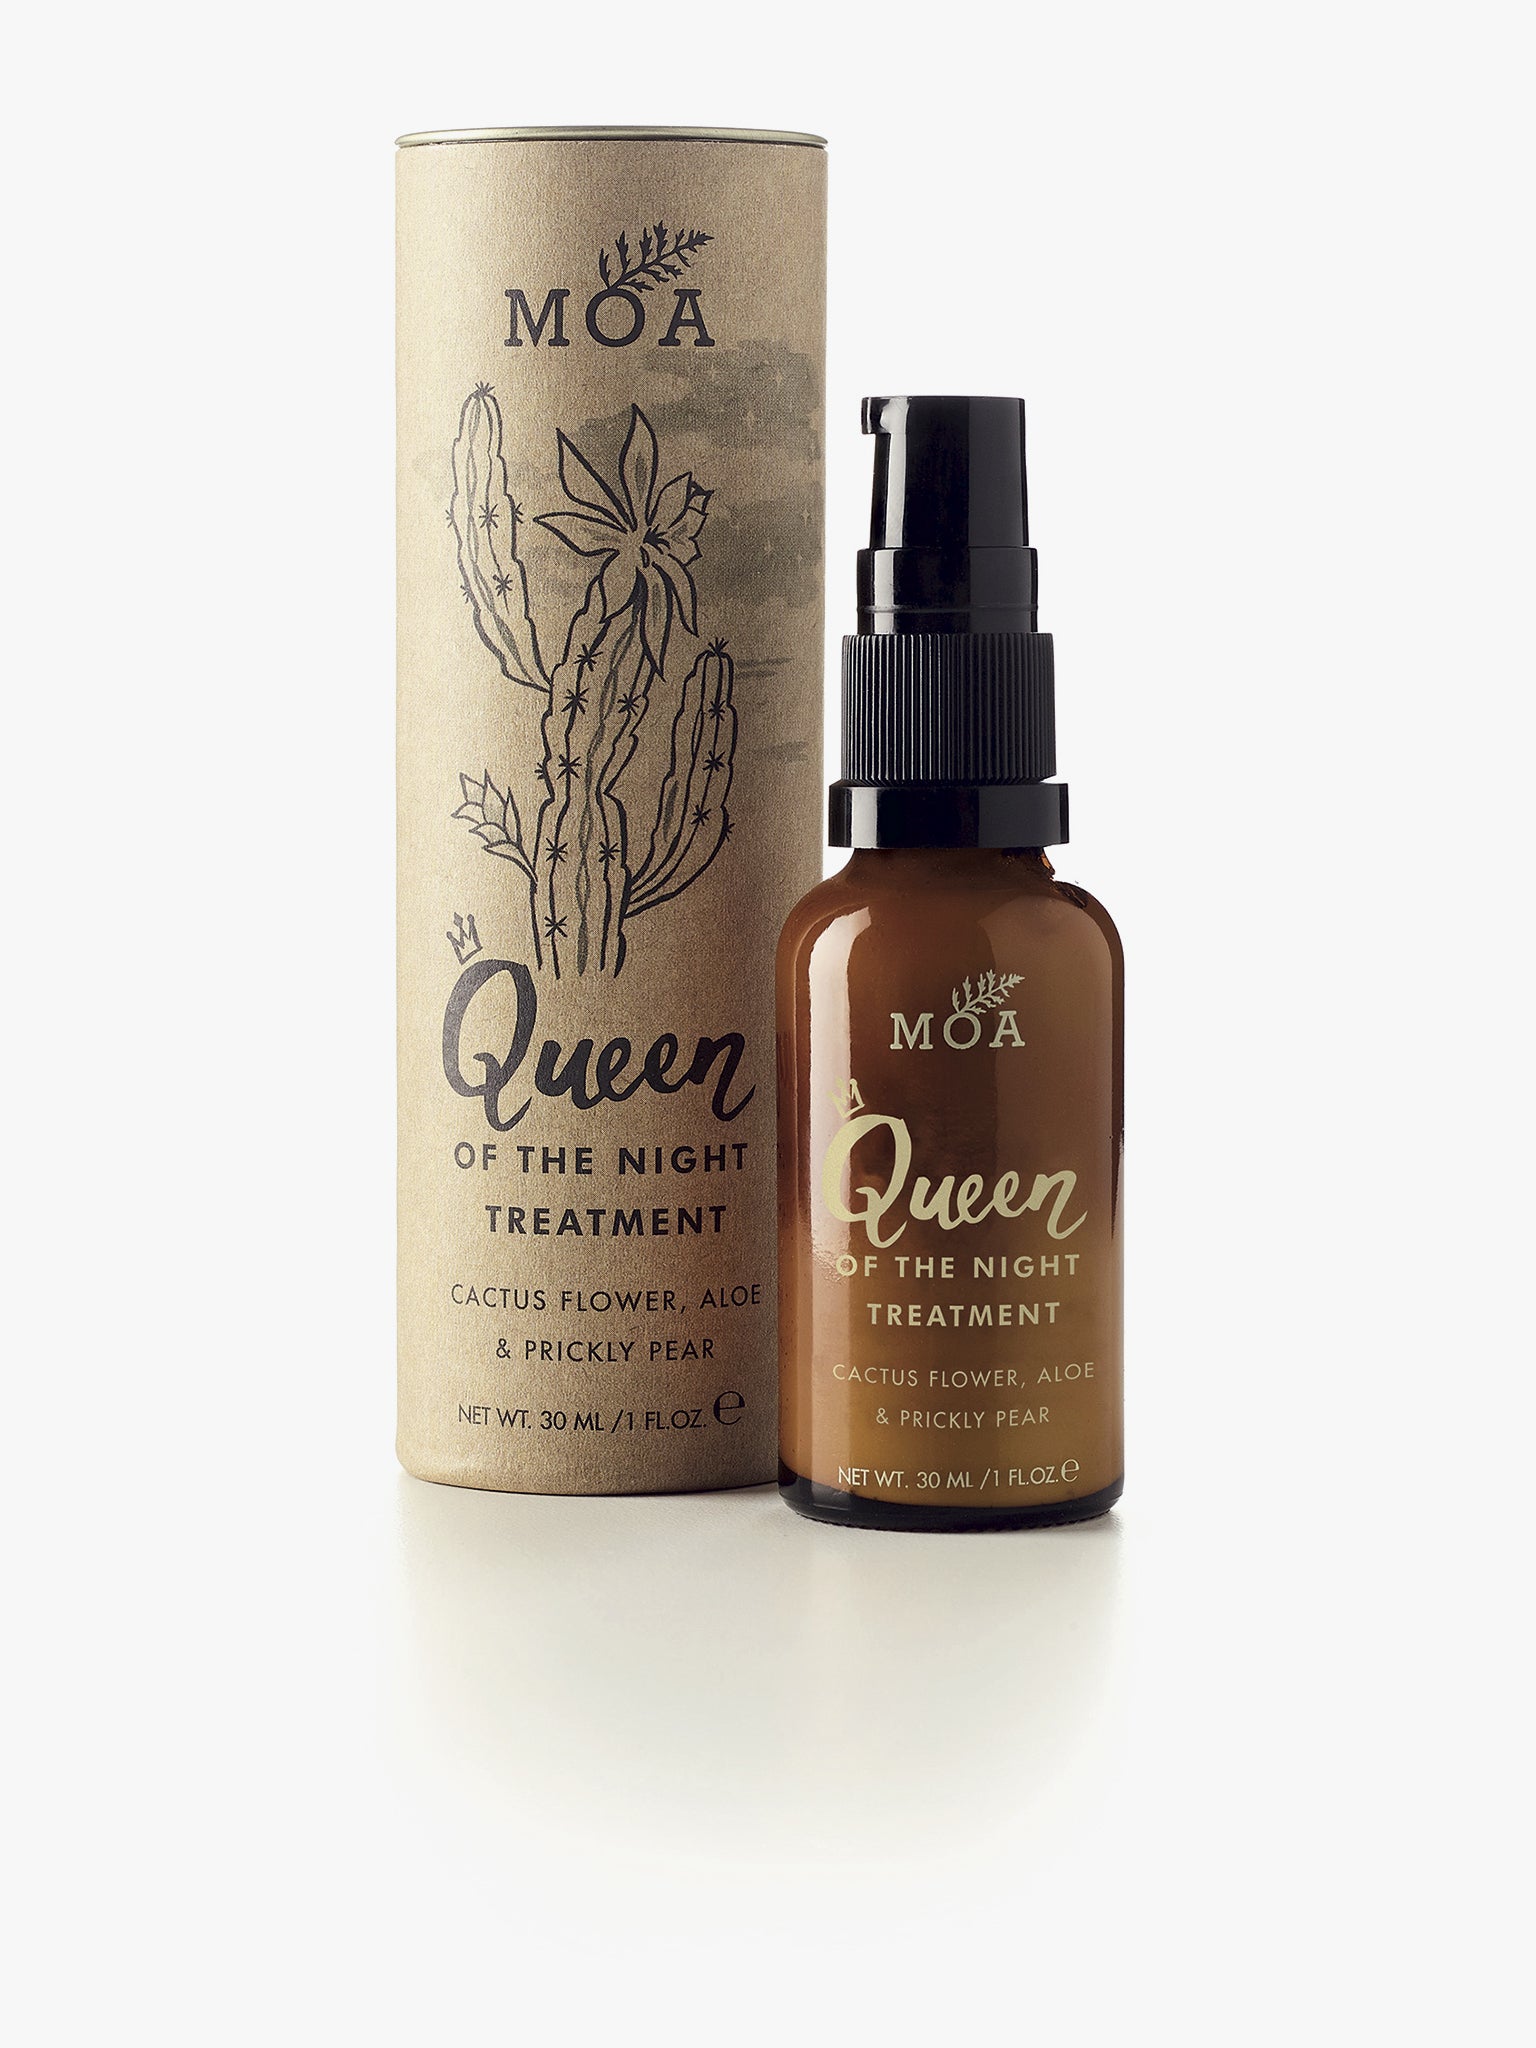 MOA Queen of the Night Treatment Serum